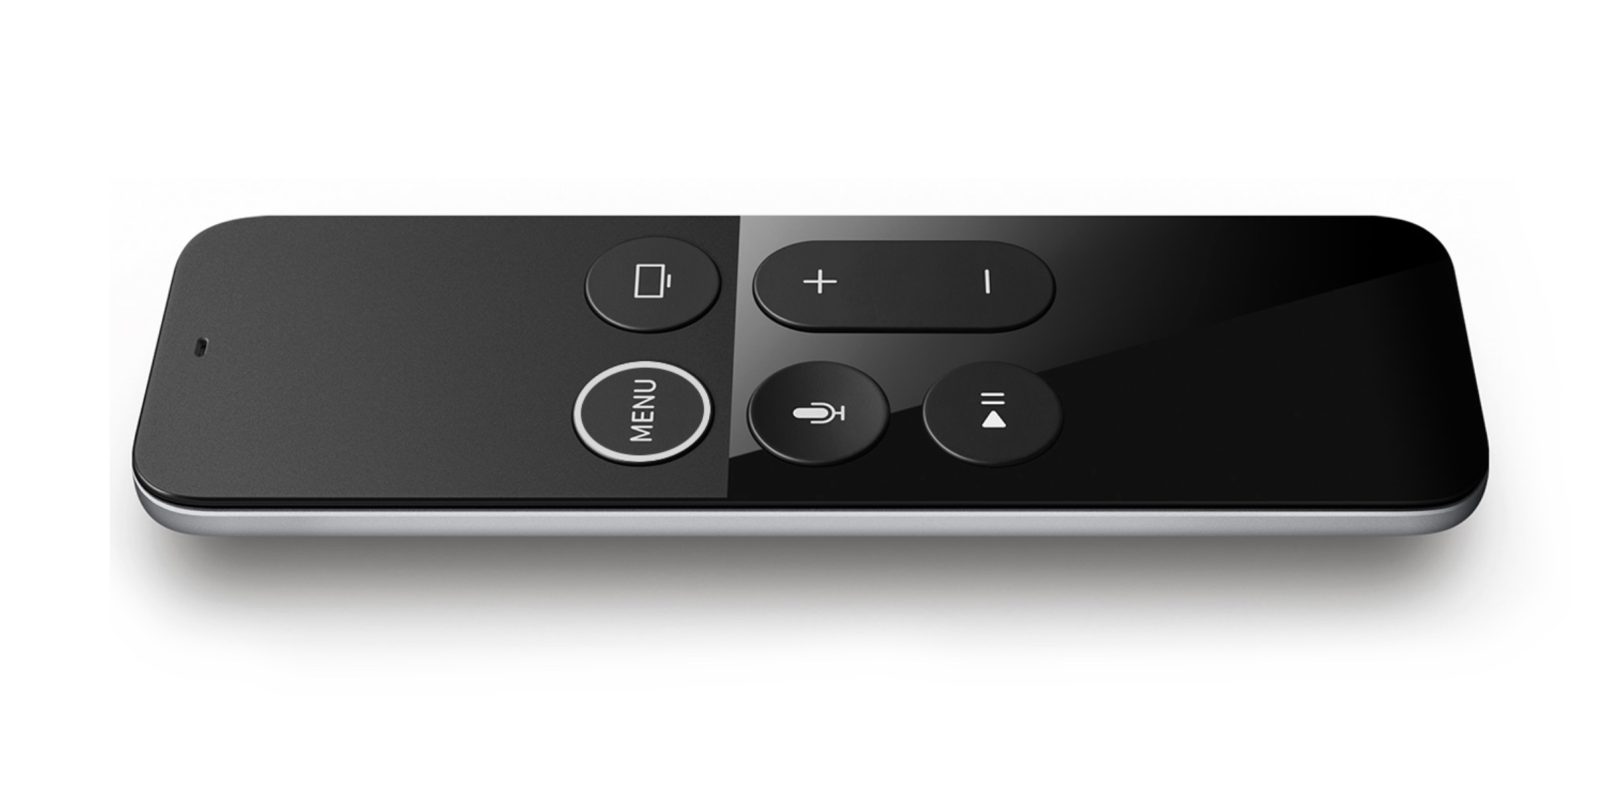 Apple TV Remote: What your options to control the Apple TV? 9to5Mac